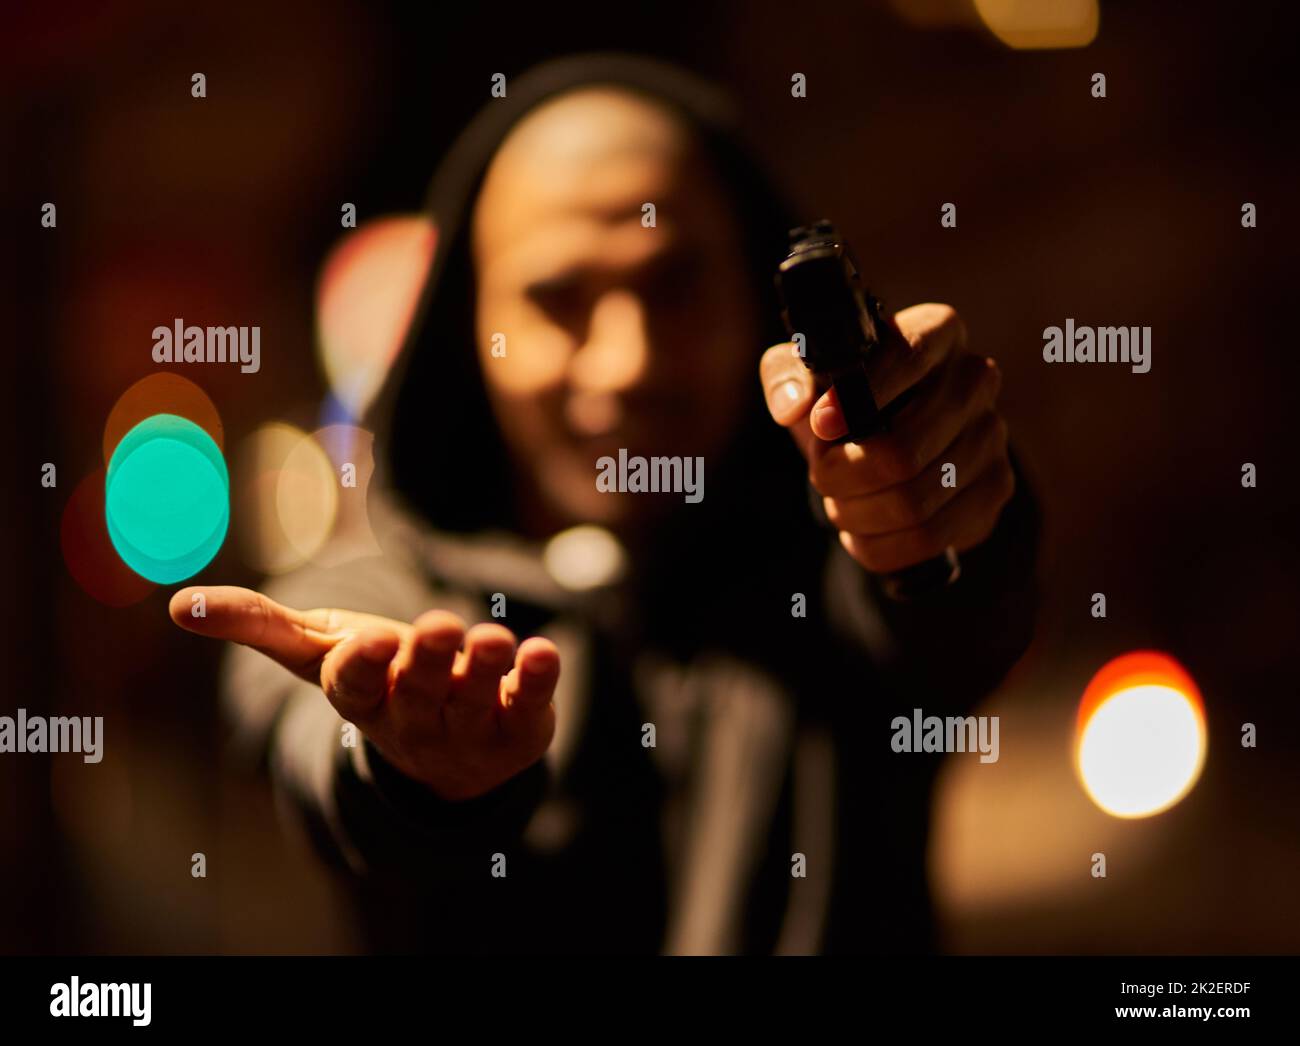 Your goods or your life. Shot of a gun-wielding thief aiming his weapon. Stock Photo